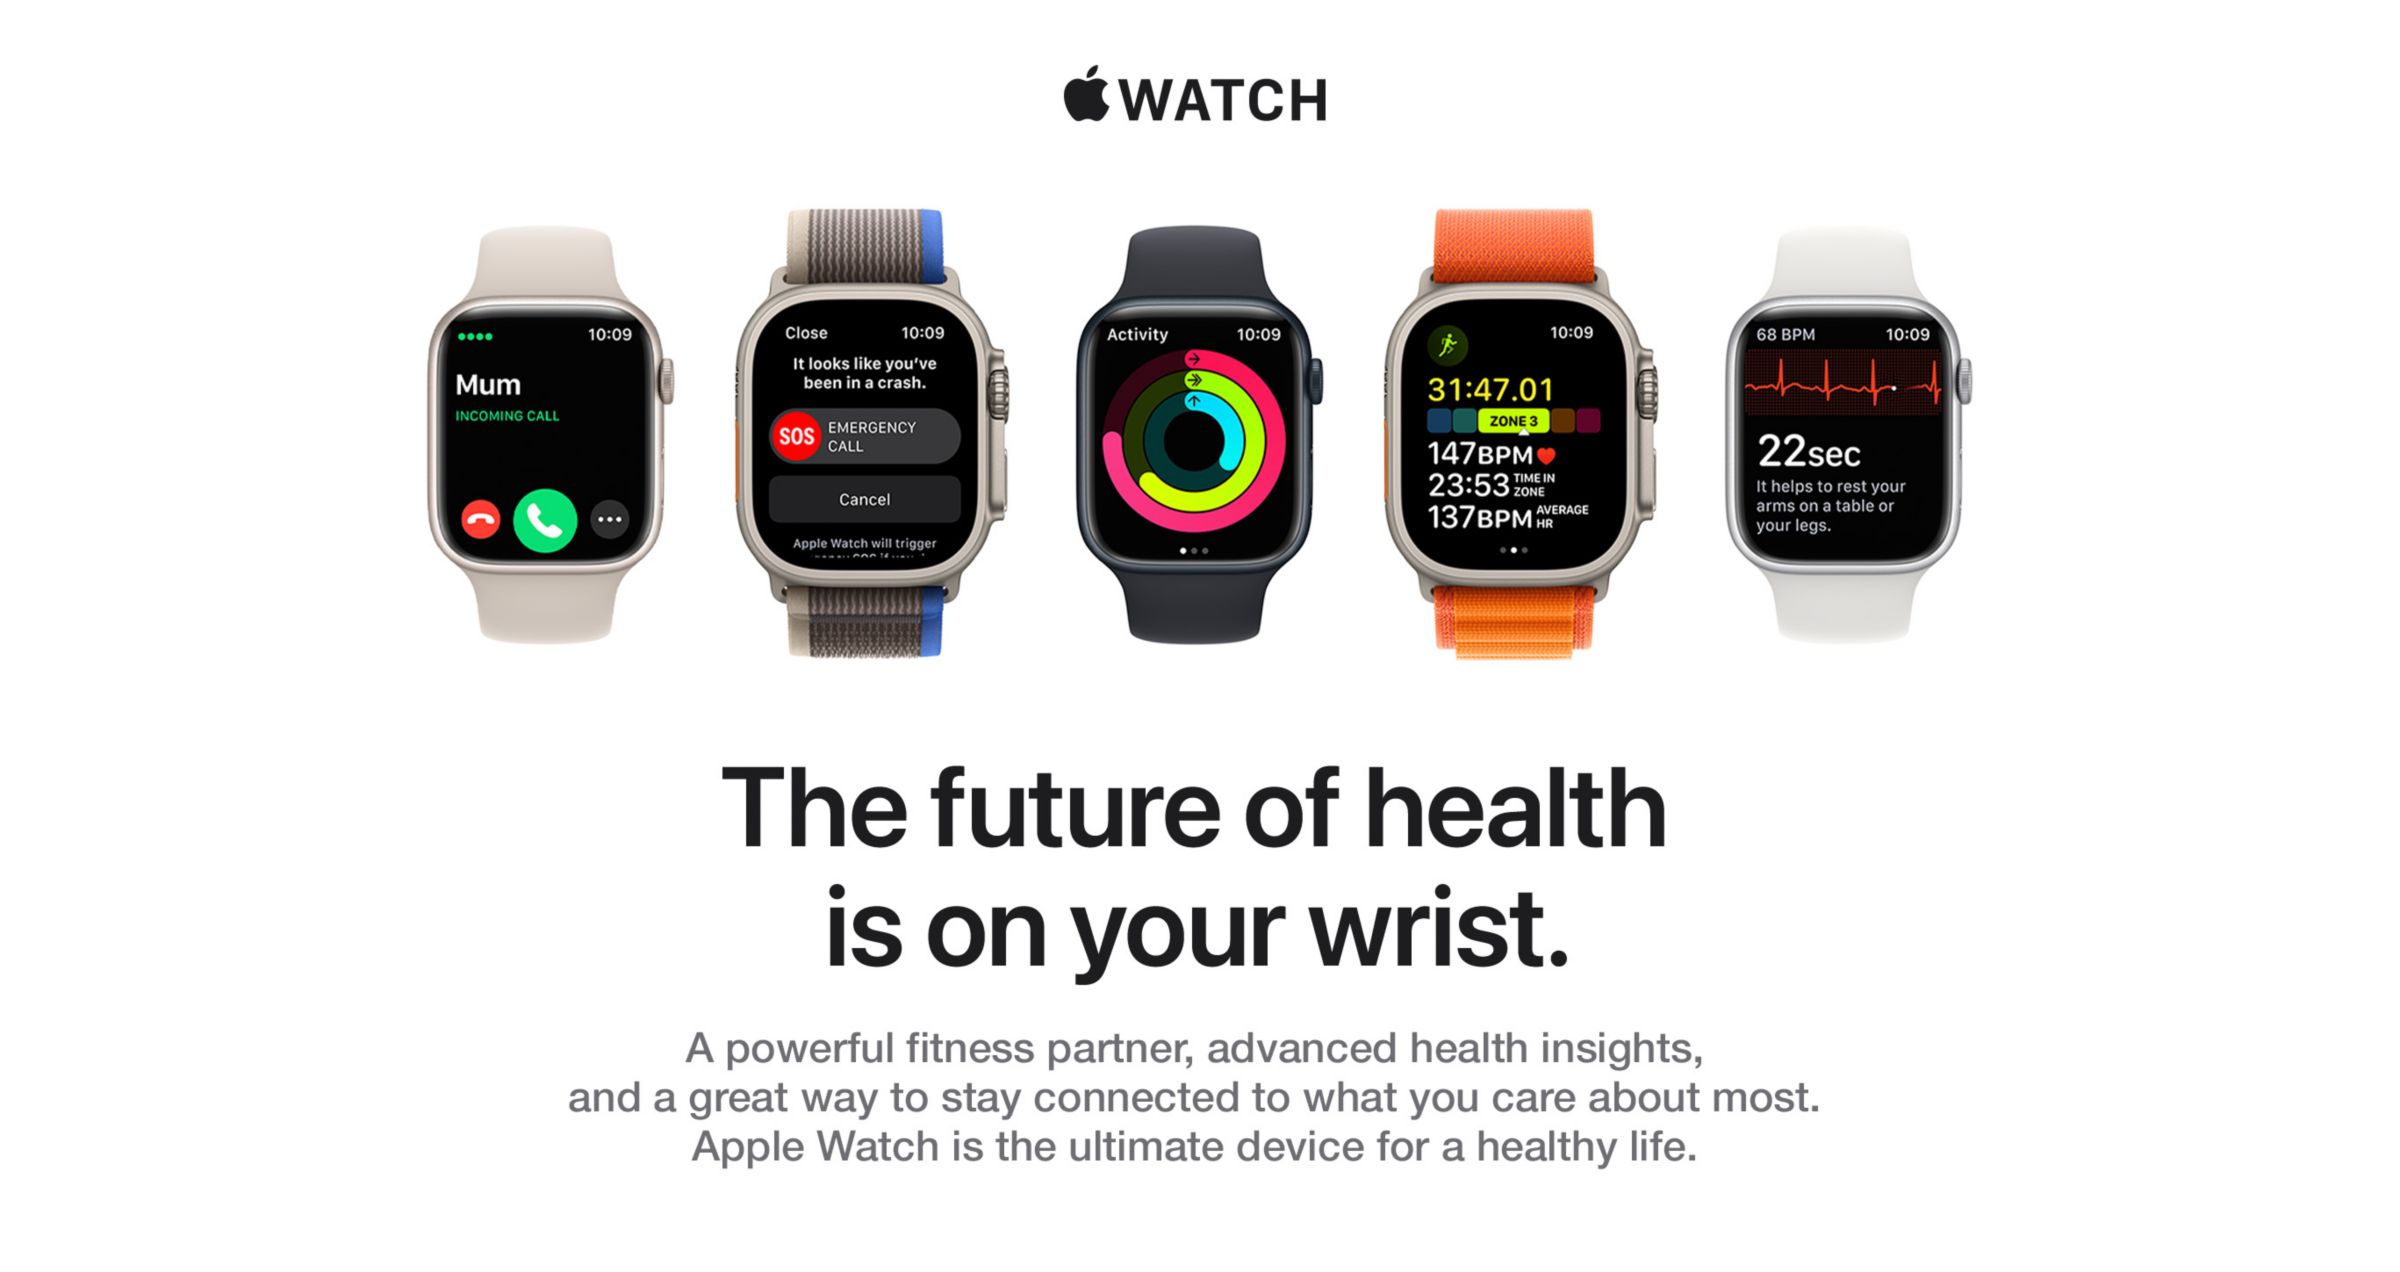 apple watch hero - the future of health is on your wrist. A powerful fitness partner, advanced health insights, and a great way to stay connected to what you care about most. Apple Watch is the ultimate device for a healthy life.